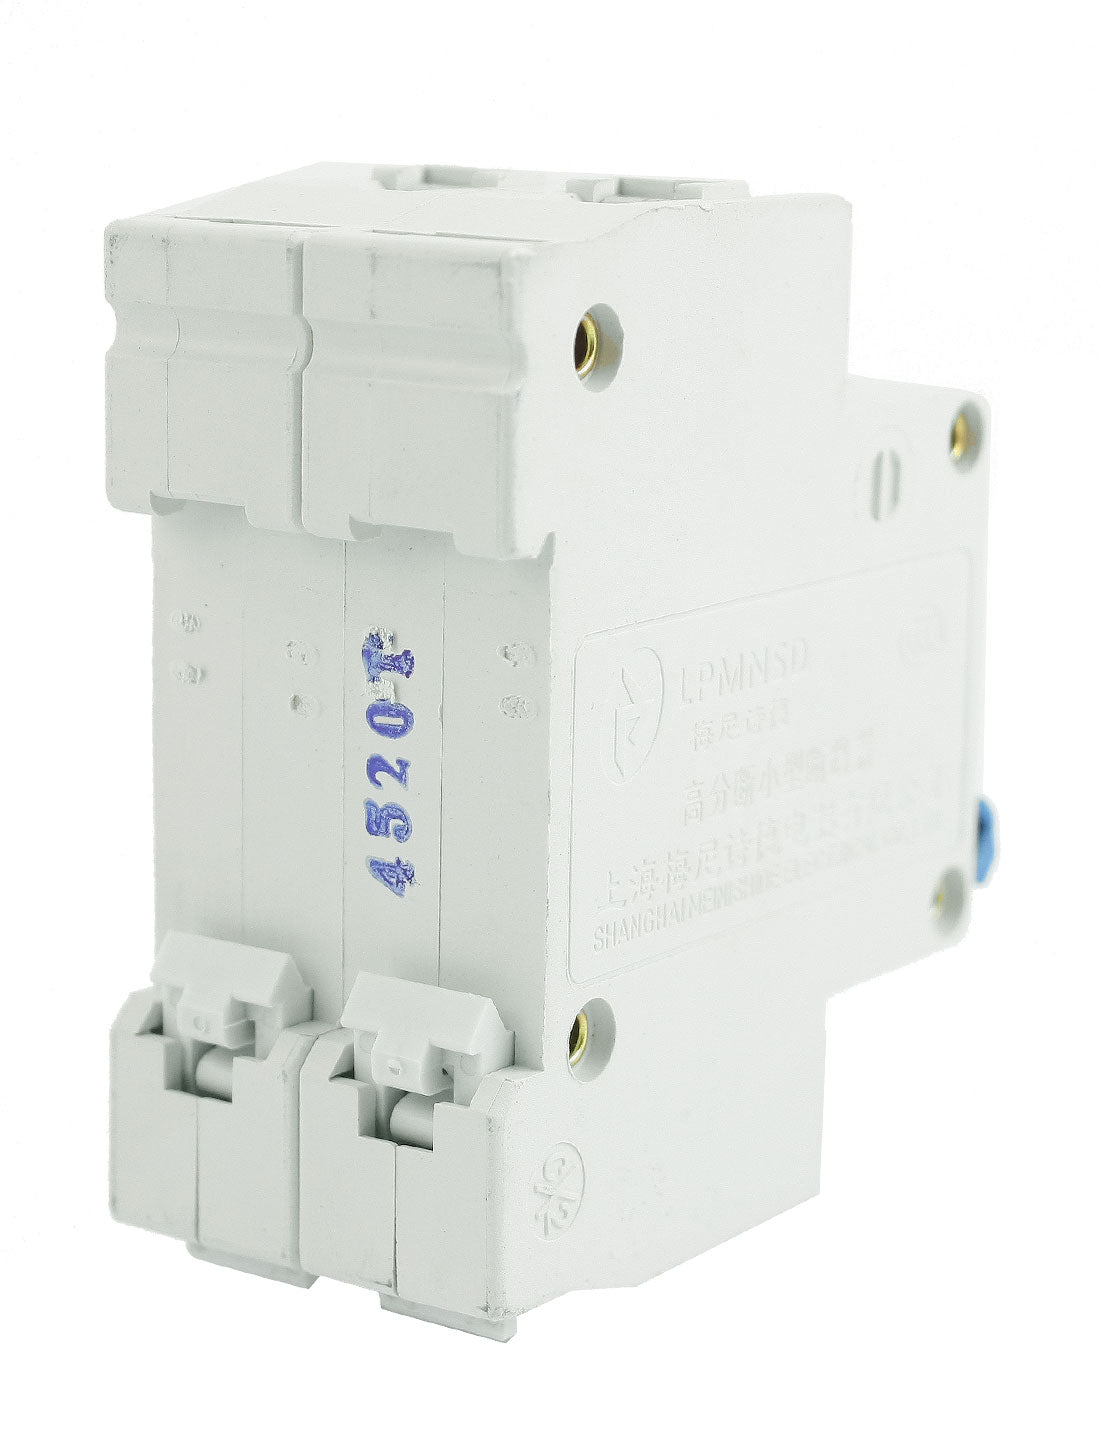 uxcell Uxcell DZ47-63 35mm DIN Rail Mount 2 Pole On/Off Switch Overload Protector Mini Circuit Breaker AC 230V 400V 20A 6000A